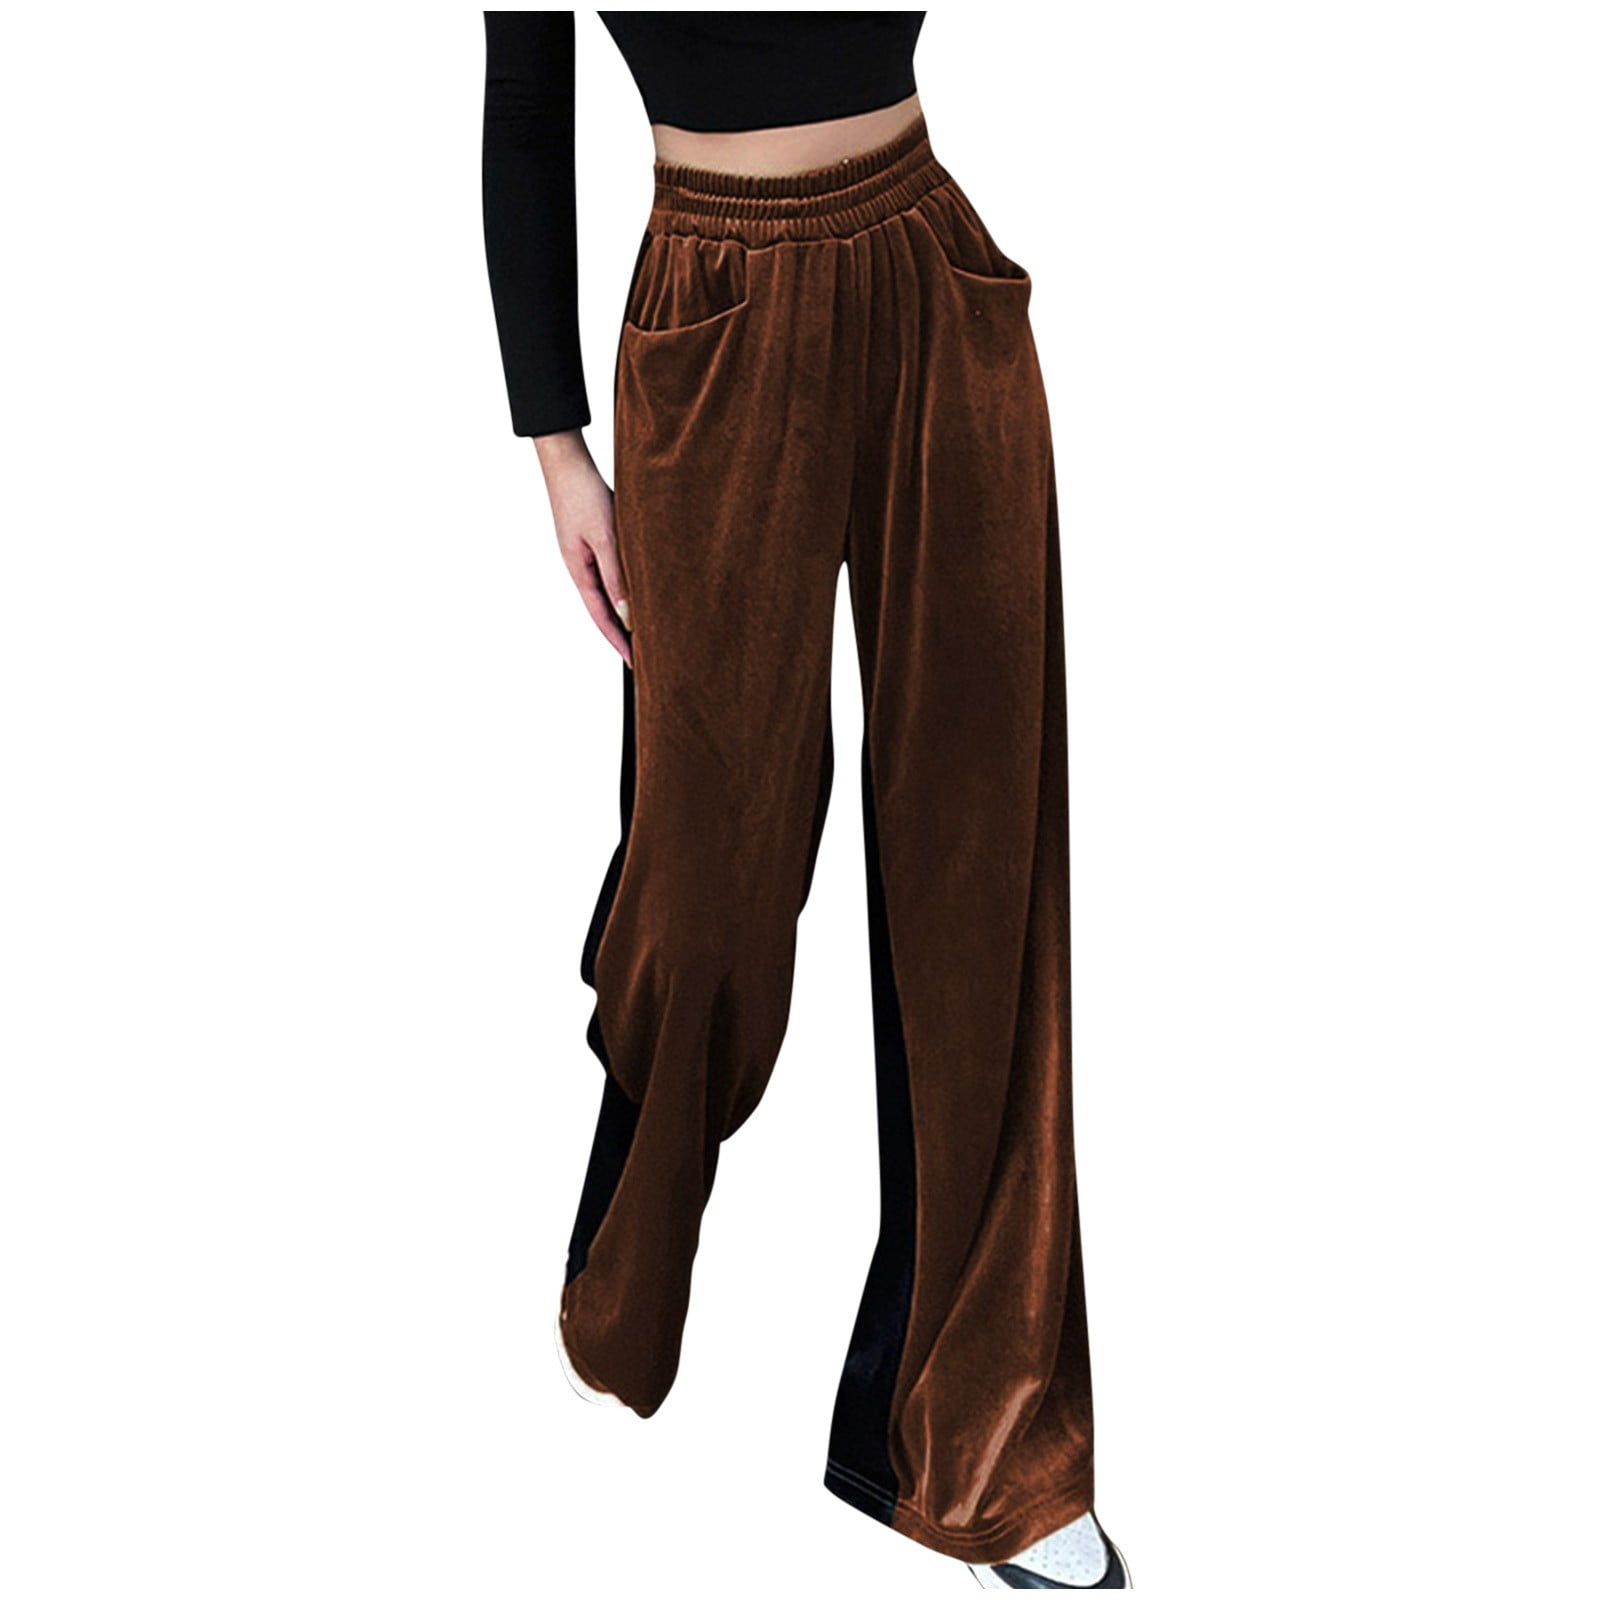 Ladies Aladdin Pants Adjustable High Waist Loose Fit Trousers with Welts  FS1038 | eBay